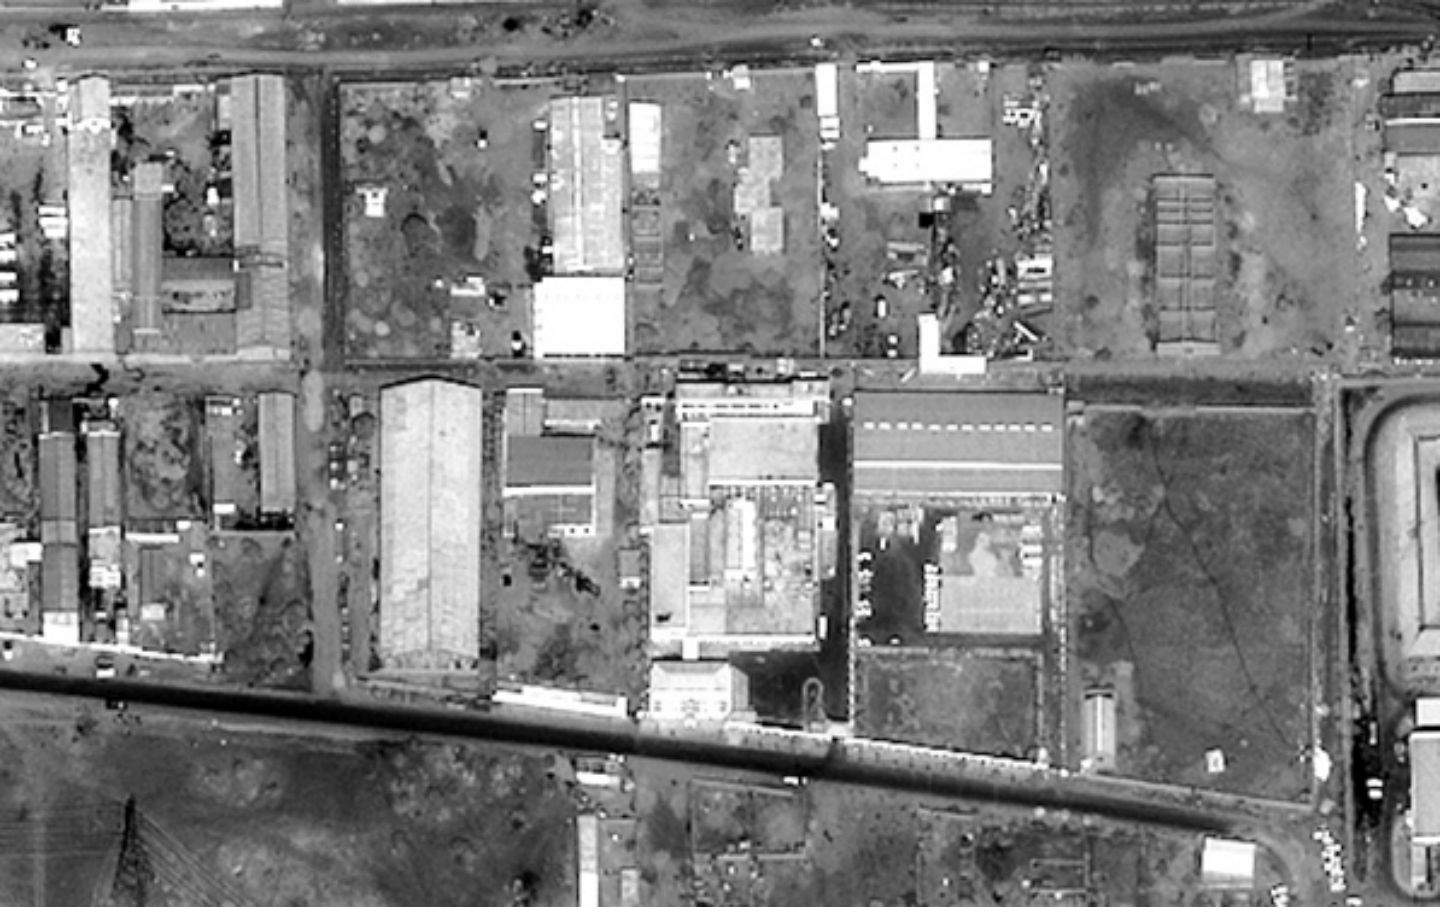 August 20, 1998: The US Bombs a Suspected Qaeda-Run Chemical Plant in Sudan